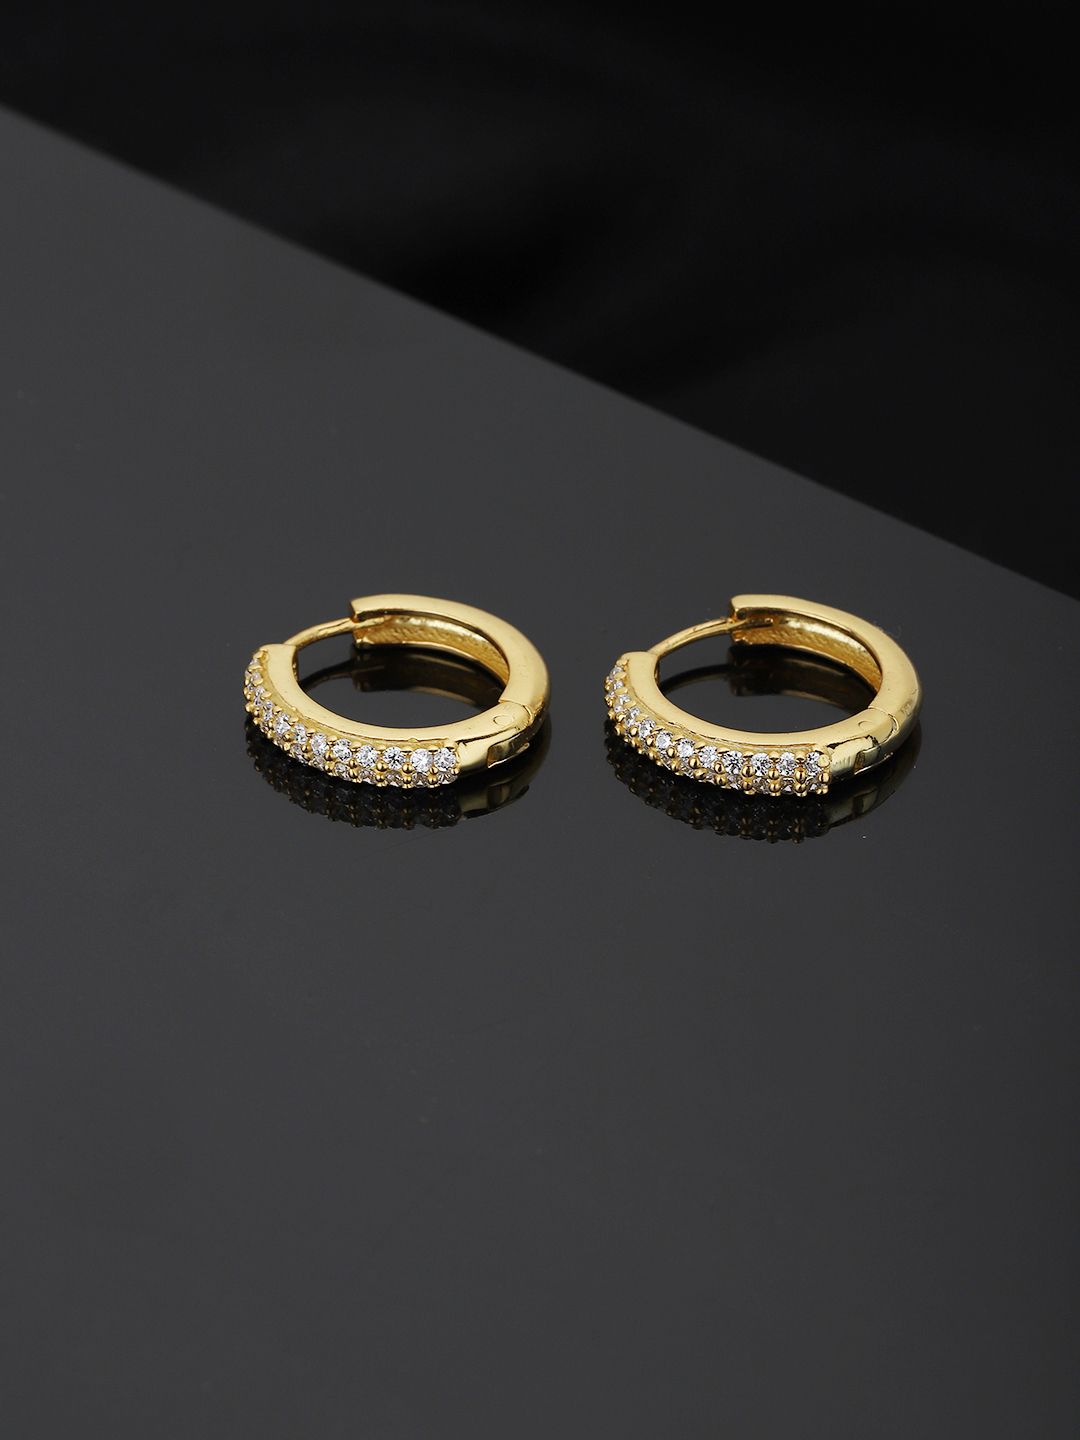 Carlton London Gold-Plated CZ Studded Circular Handcrafted Huggie Hoop Earrings Price in India